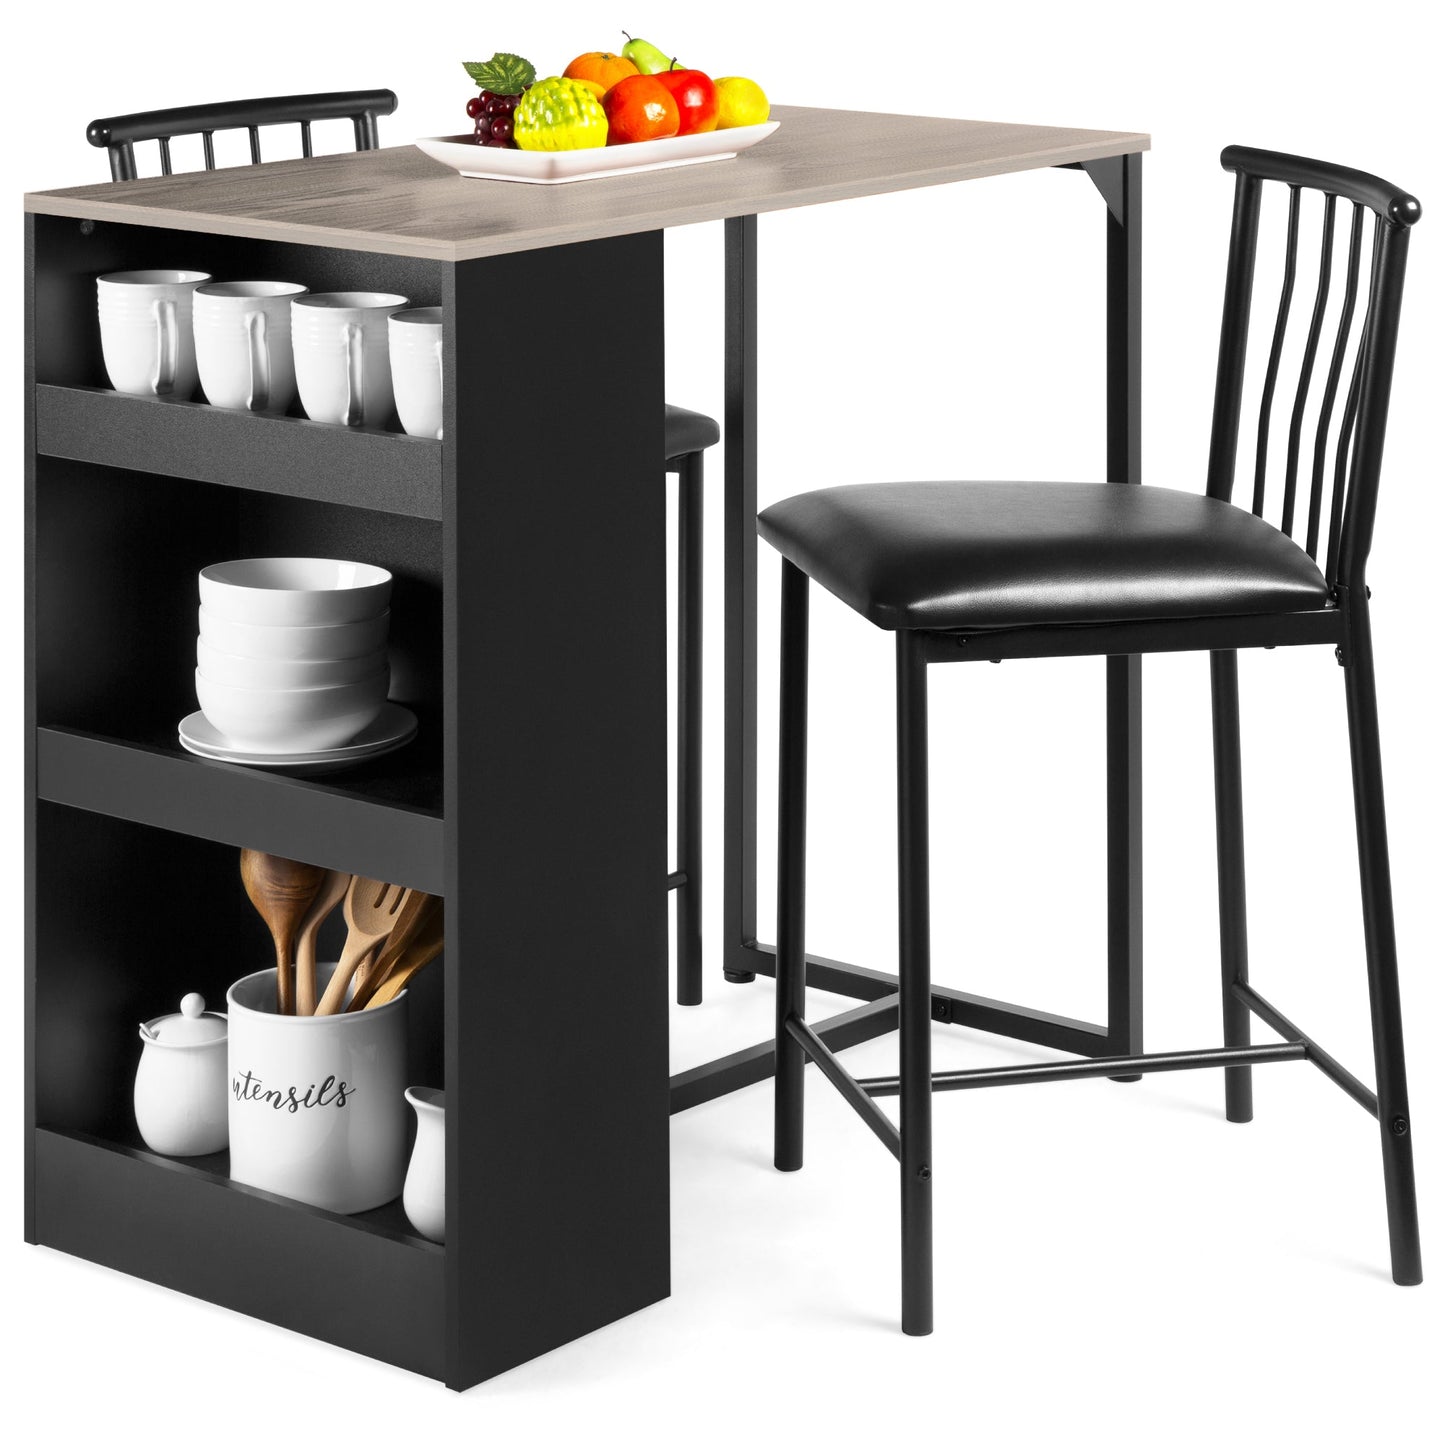 3-Piece Counter Height Kitchen Dining Table Set w/ Storage Shelves